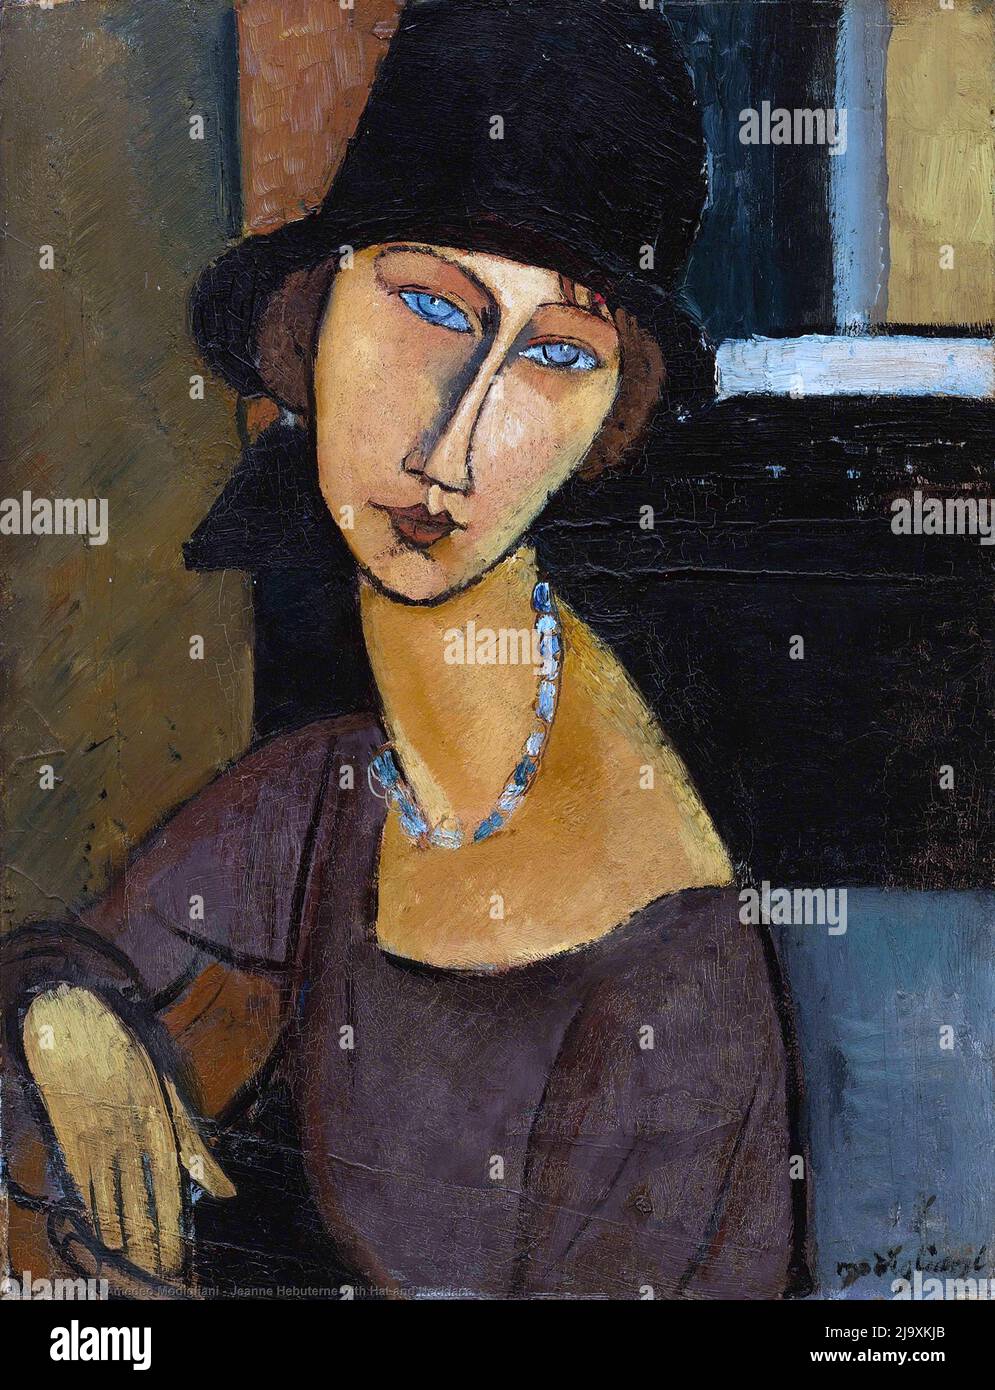 Title: Jeanne Hébuterne with Hat and Necklace Creator: Amedeo Modigliani Date: 1917 Dimensions: 164 x 137 cm Medium: oil on canvas Location: Private collection Stock Photo